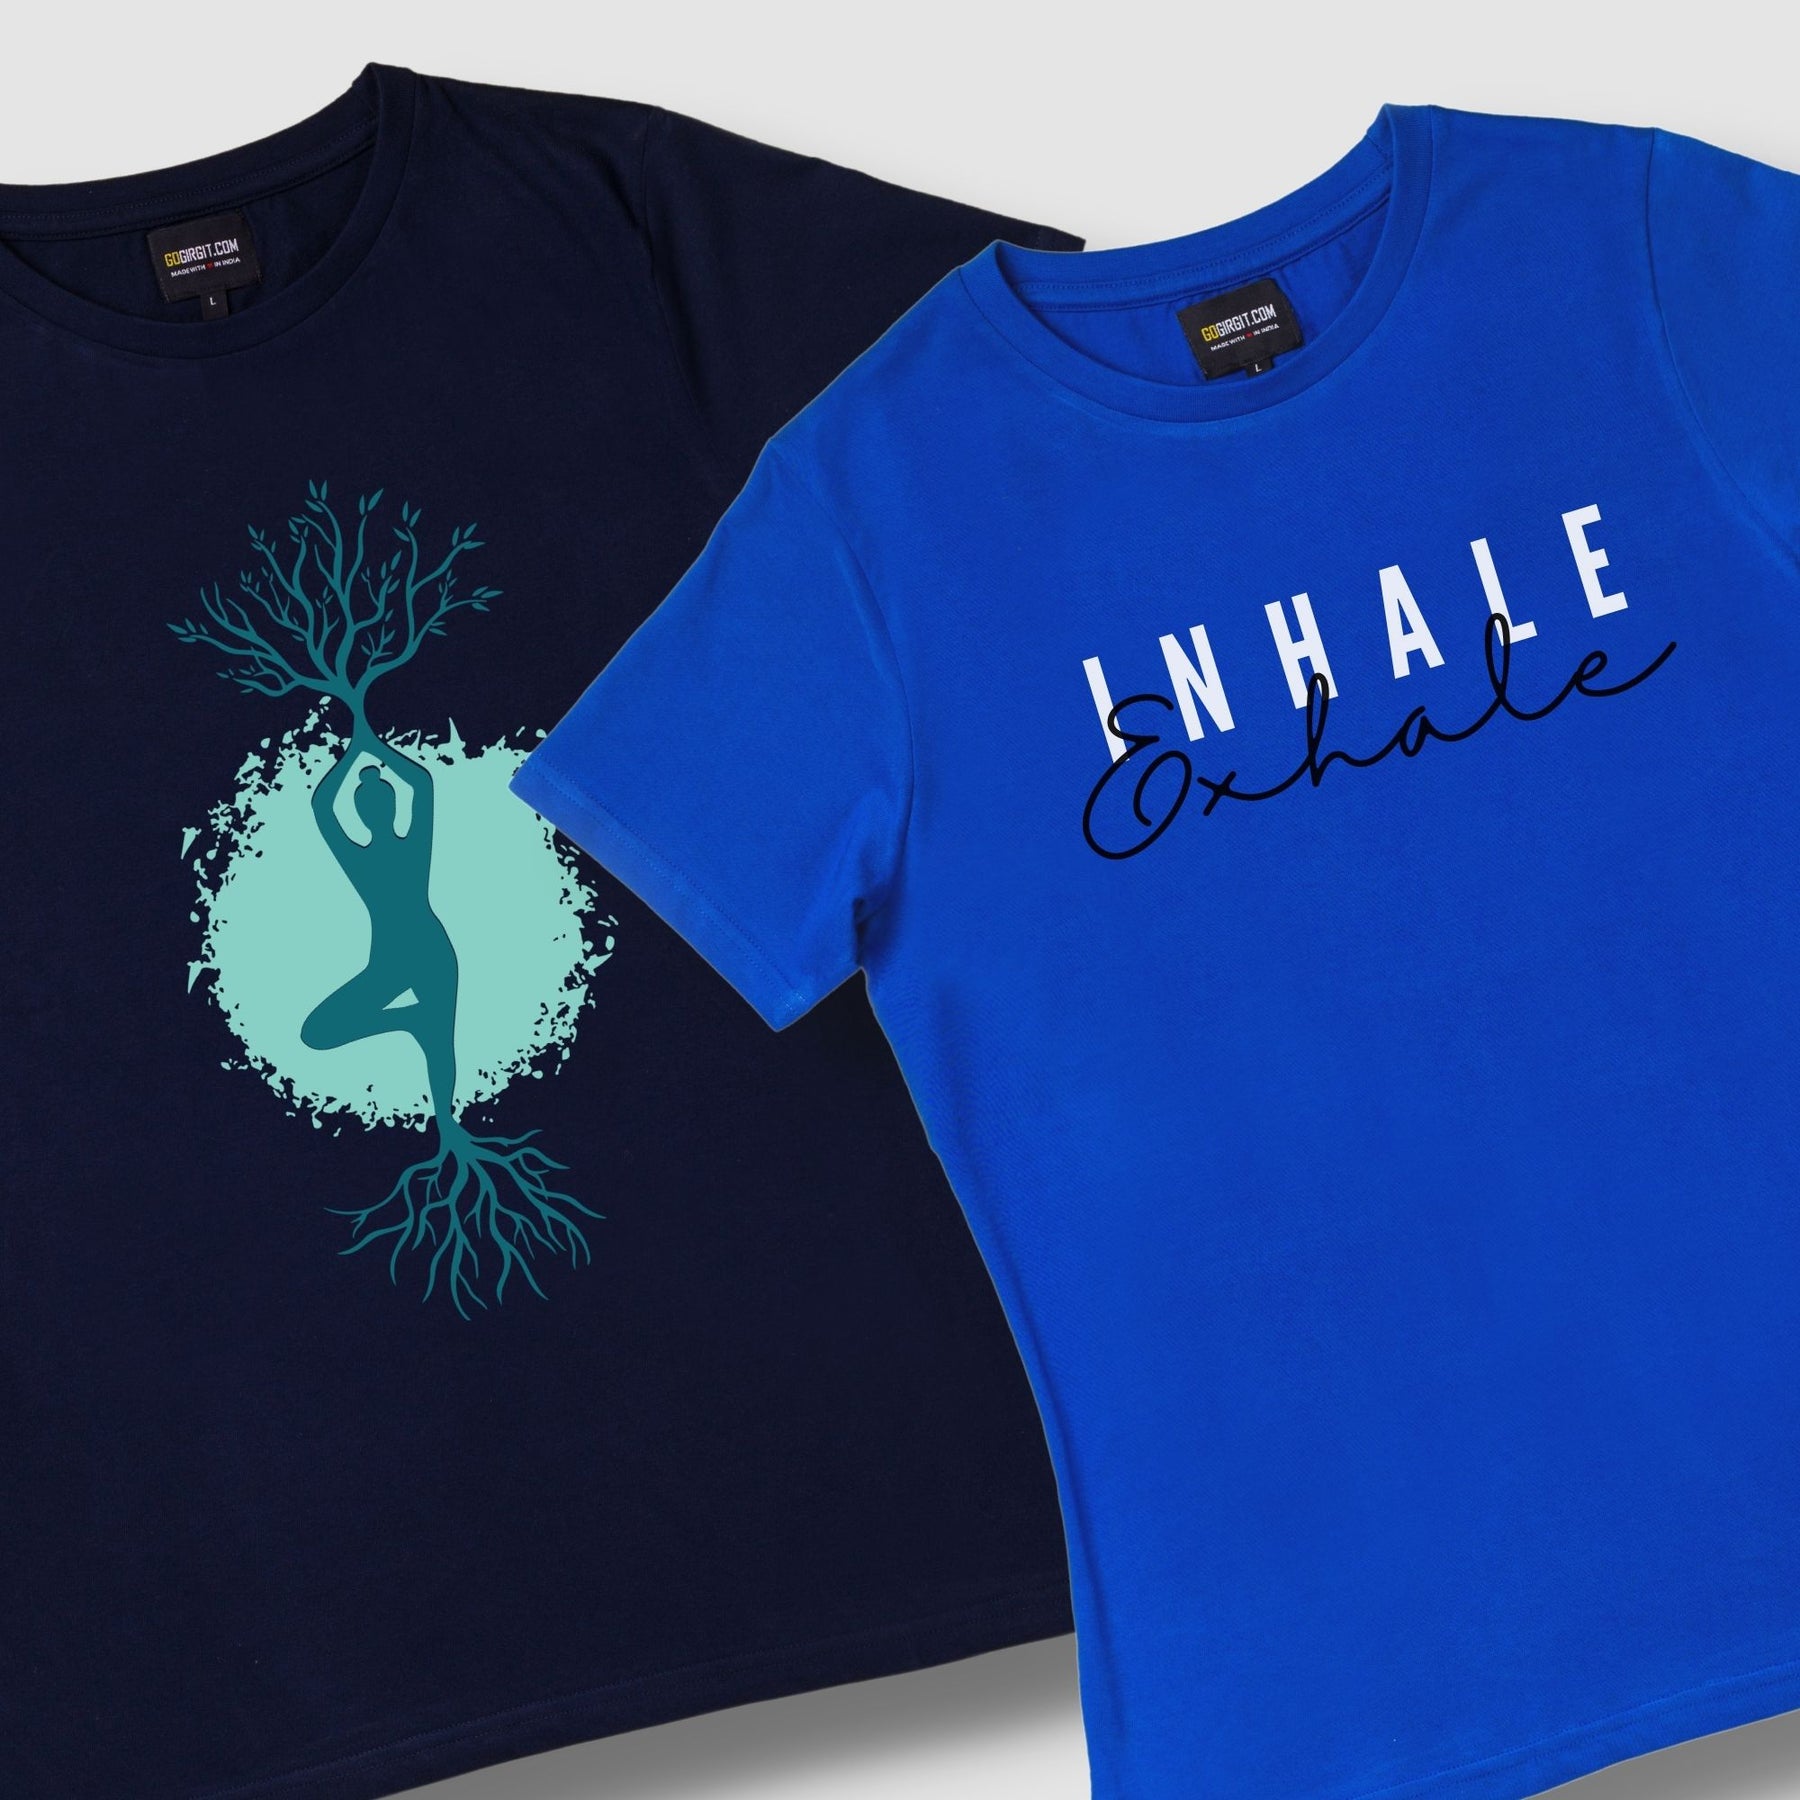 pack-of-2-women-s-printed-yoga-t-shirts-in-navy-blue-royal-blue-tree-pose-inhale-exhale-design-tshirt